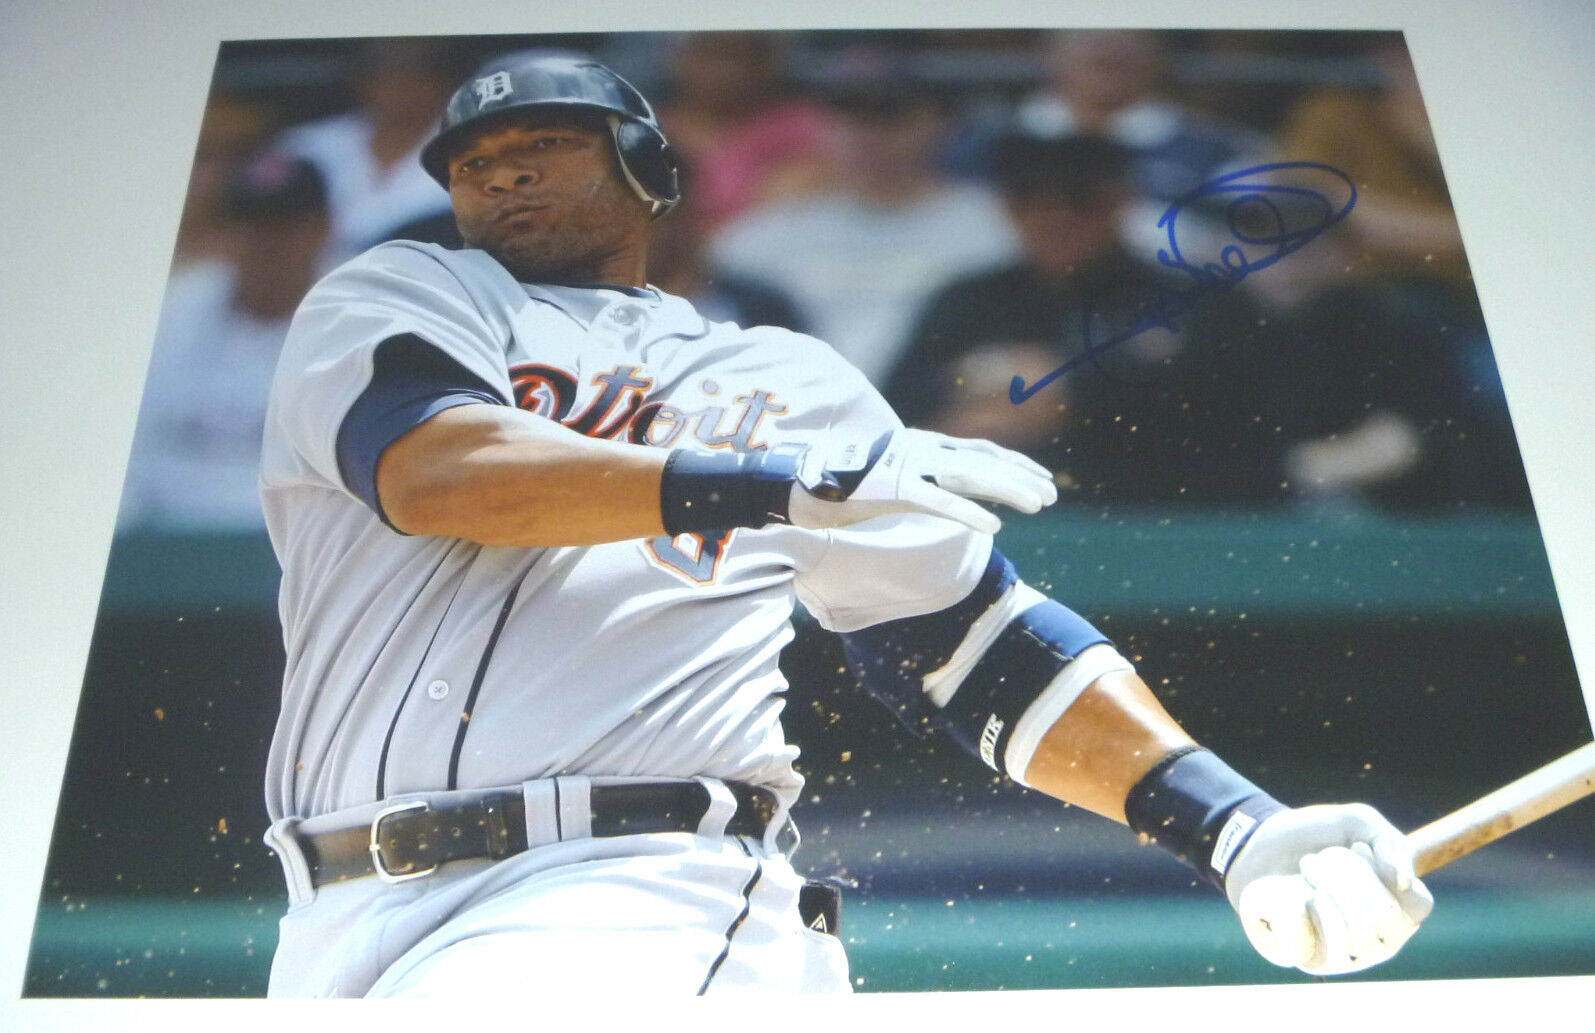 Gary Sheffield Authentic Signed 8x10 MLB Baseball Photo Poster painting Autographed, Detroit